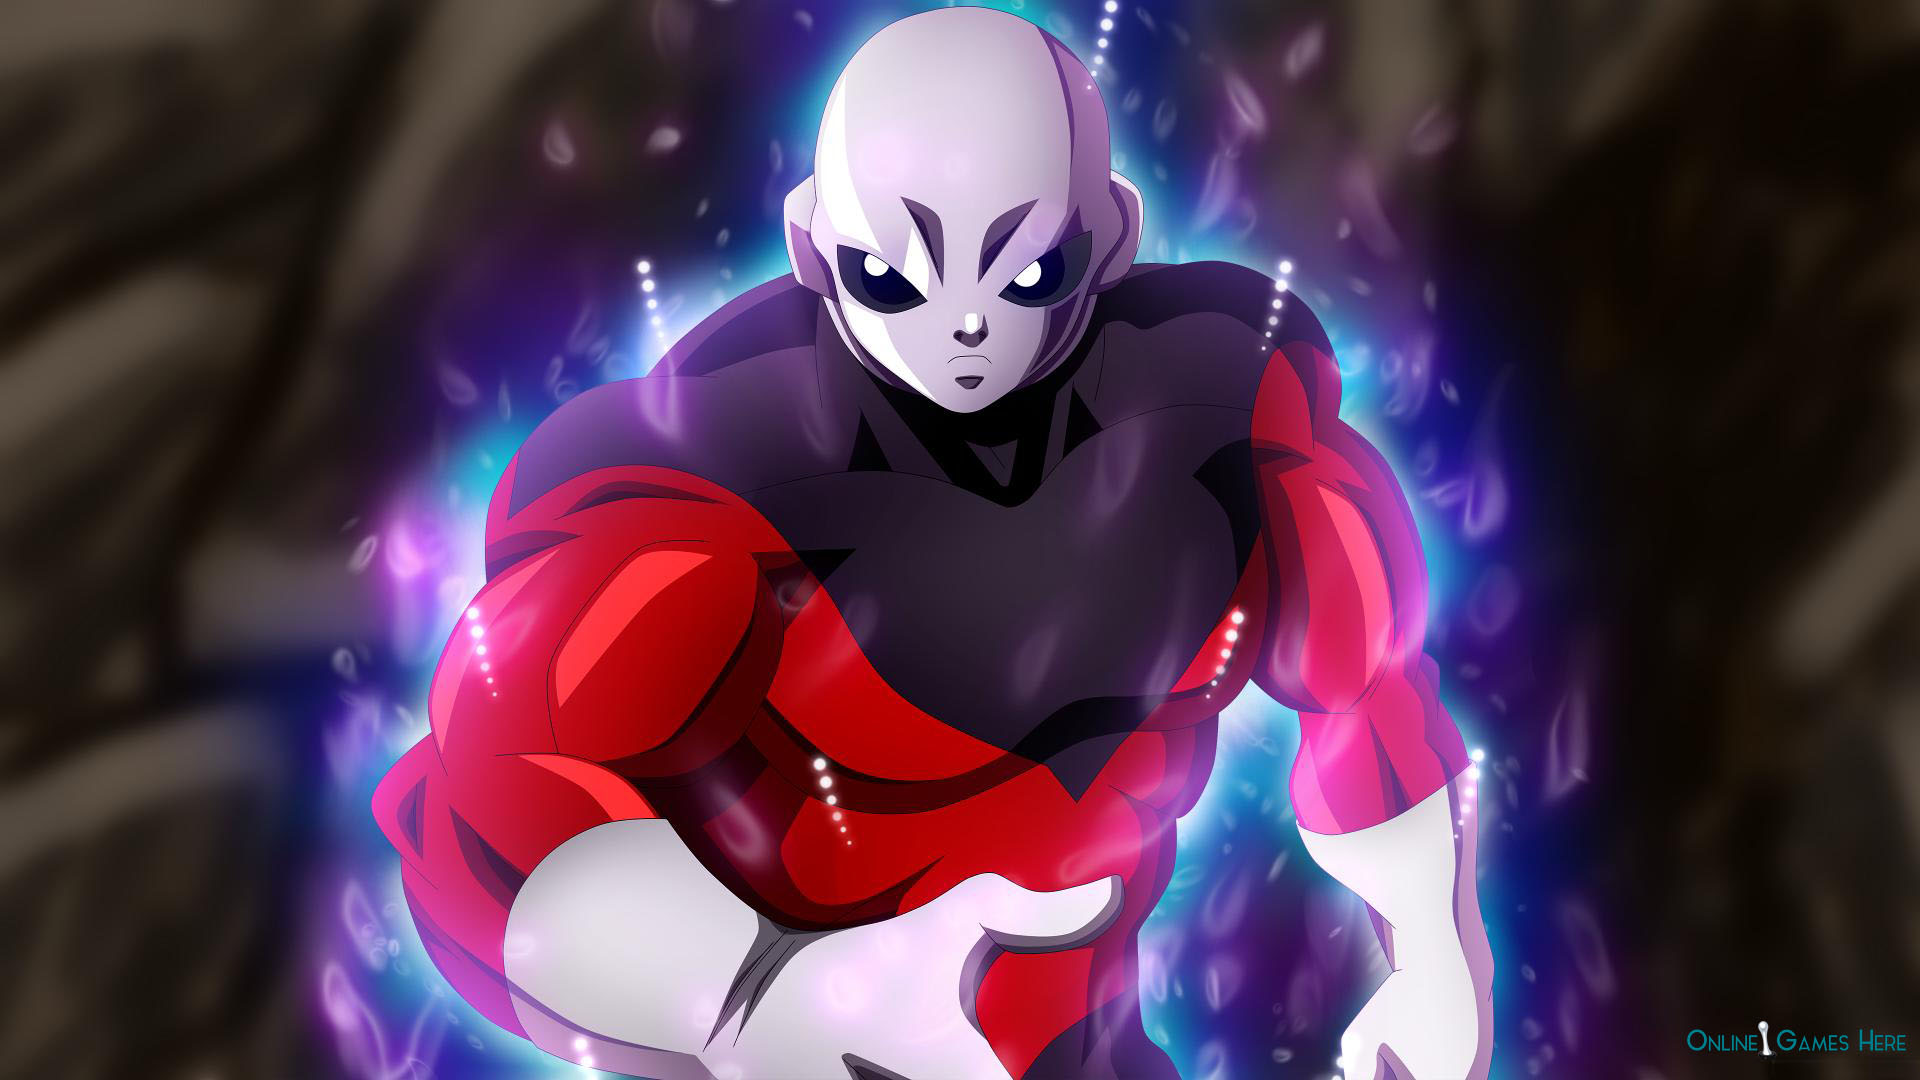 Jiren Is A Very Strong Character Of Dragon Ball Z Game